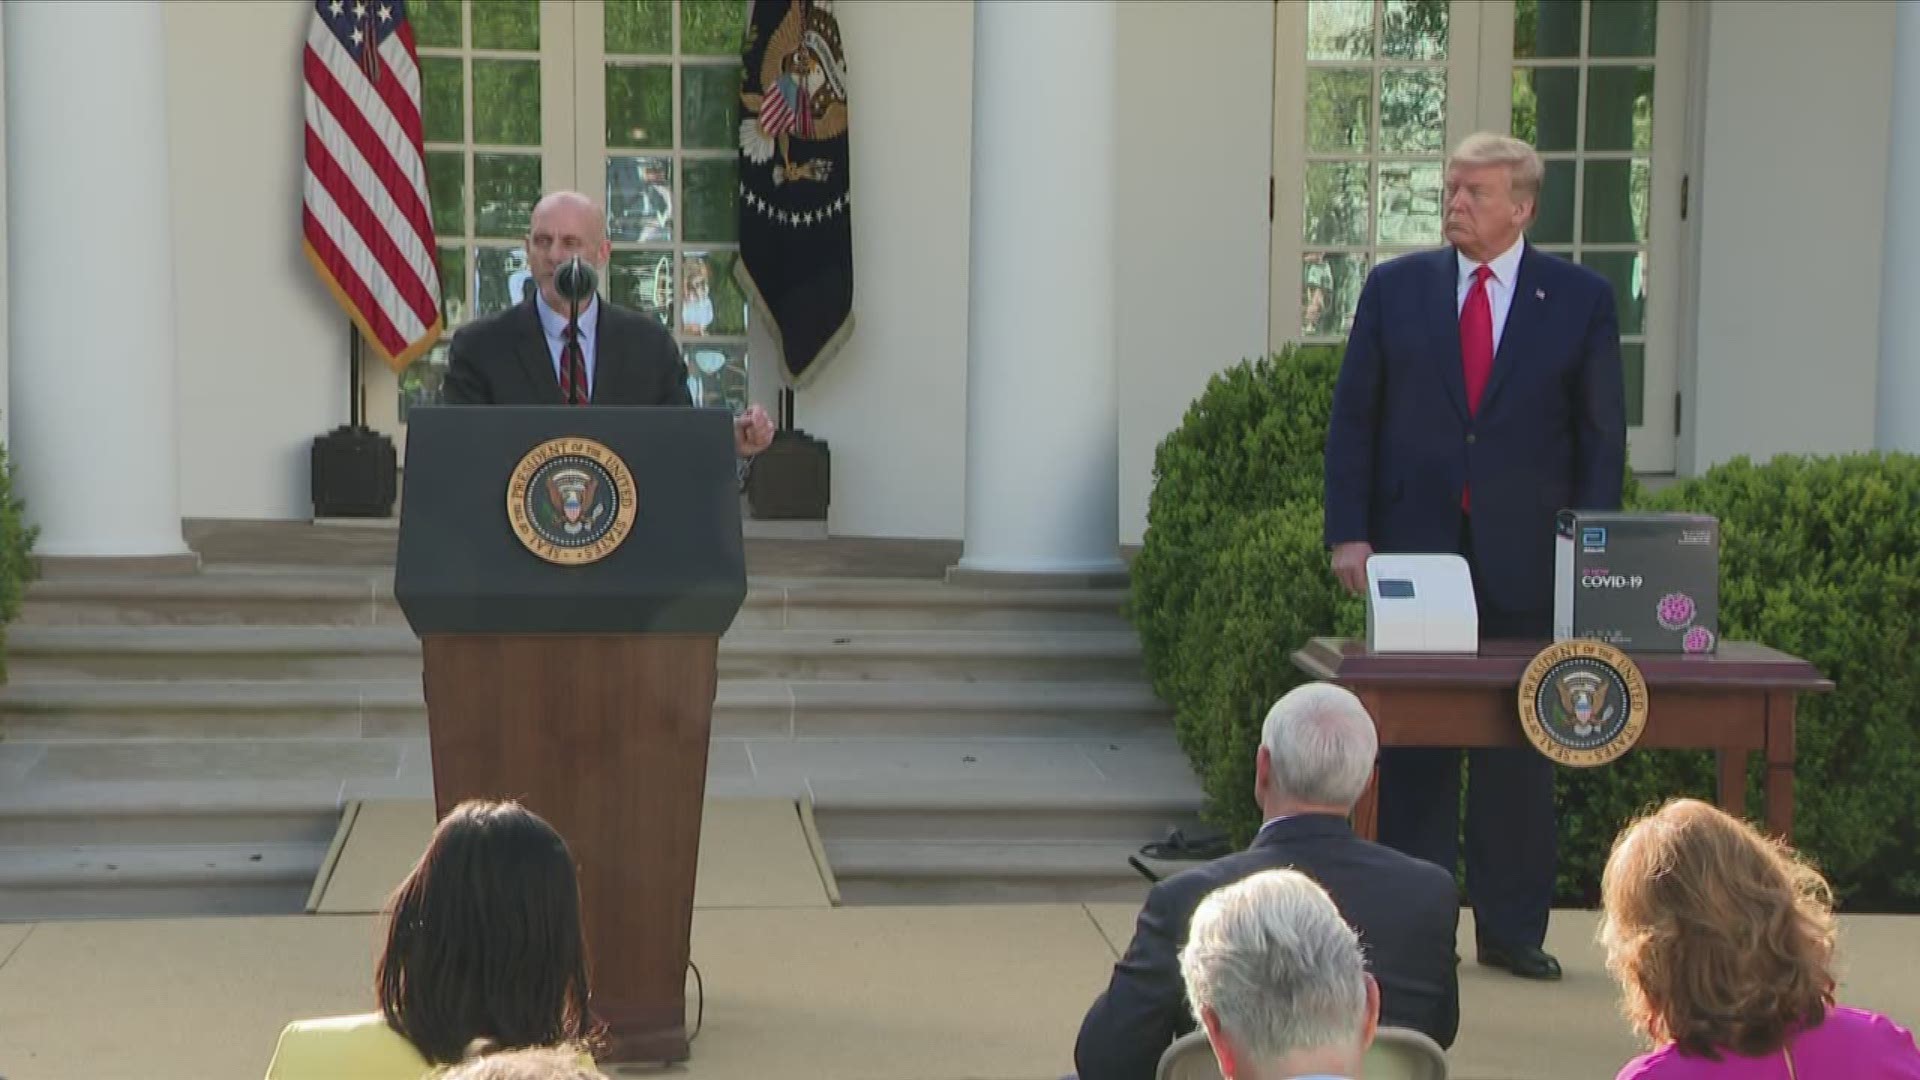 During Monday's White House update on coronavirus response, President Donald Trump showed off a point-of-care test that can provide results in minutes.